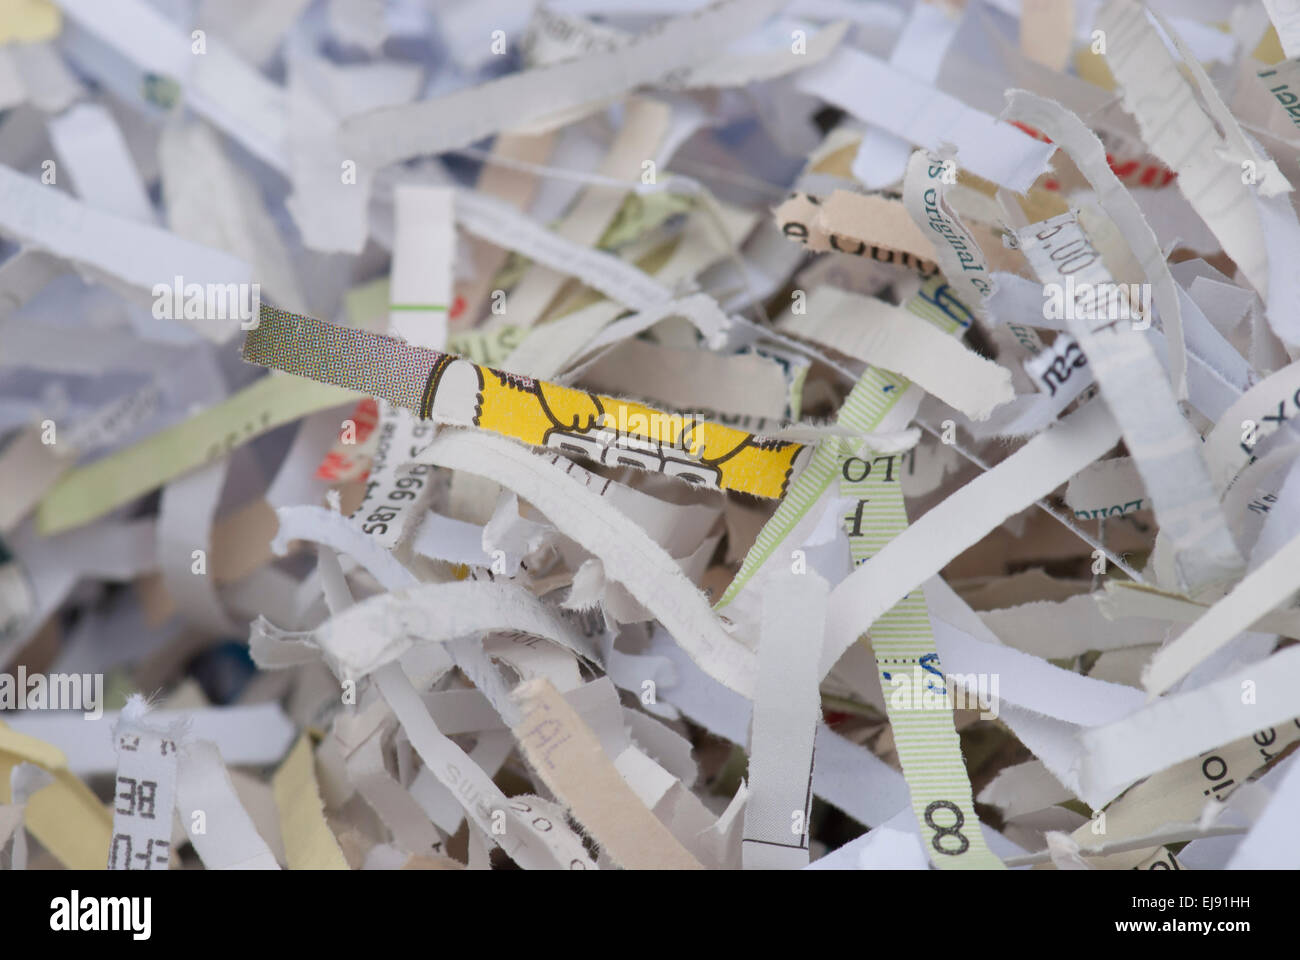 Shredding documents, receipts, personal papers Stock Photo